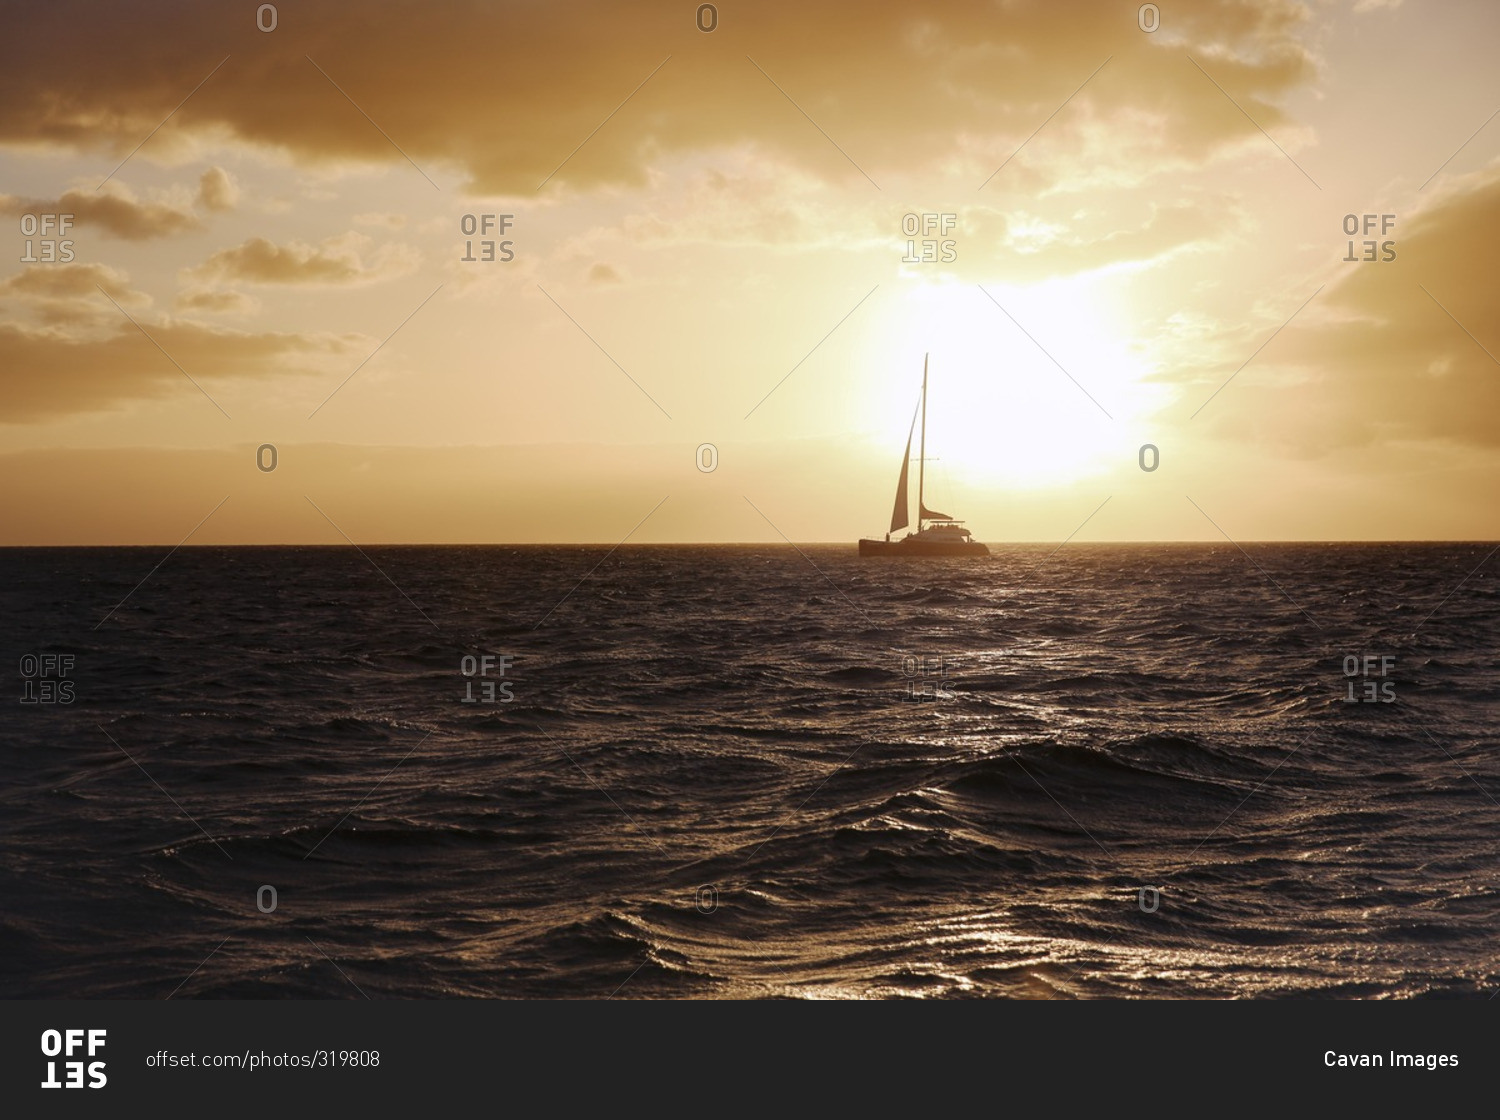 Silhouette of a sailboat on the ocean at sunset